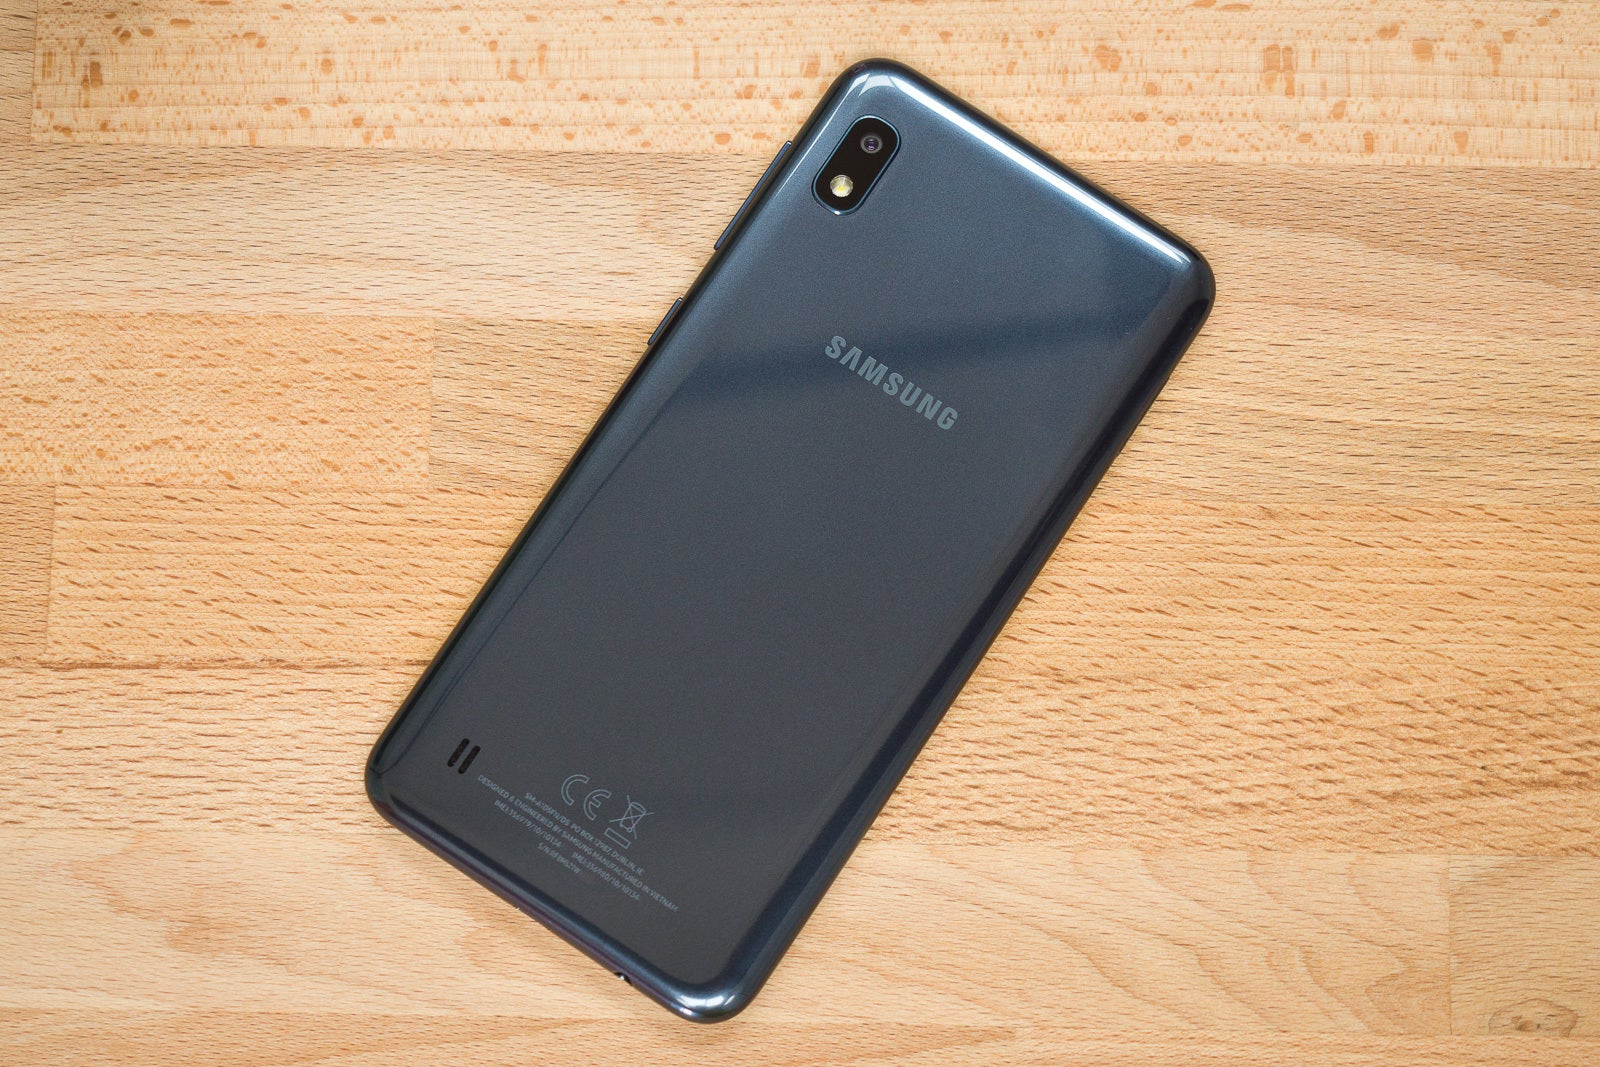 I spent a week using Samsung's best-selling phone (which costs just $150!)